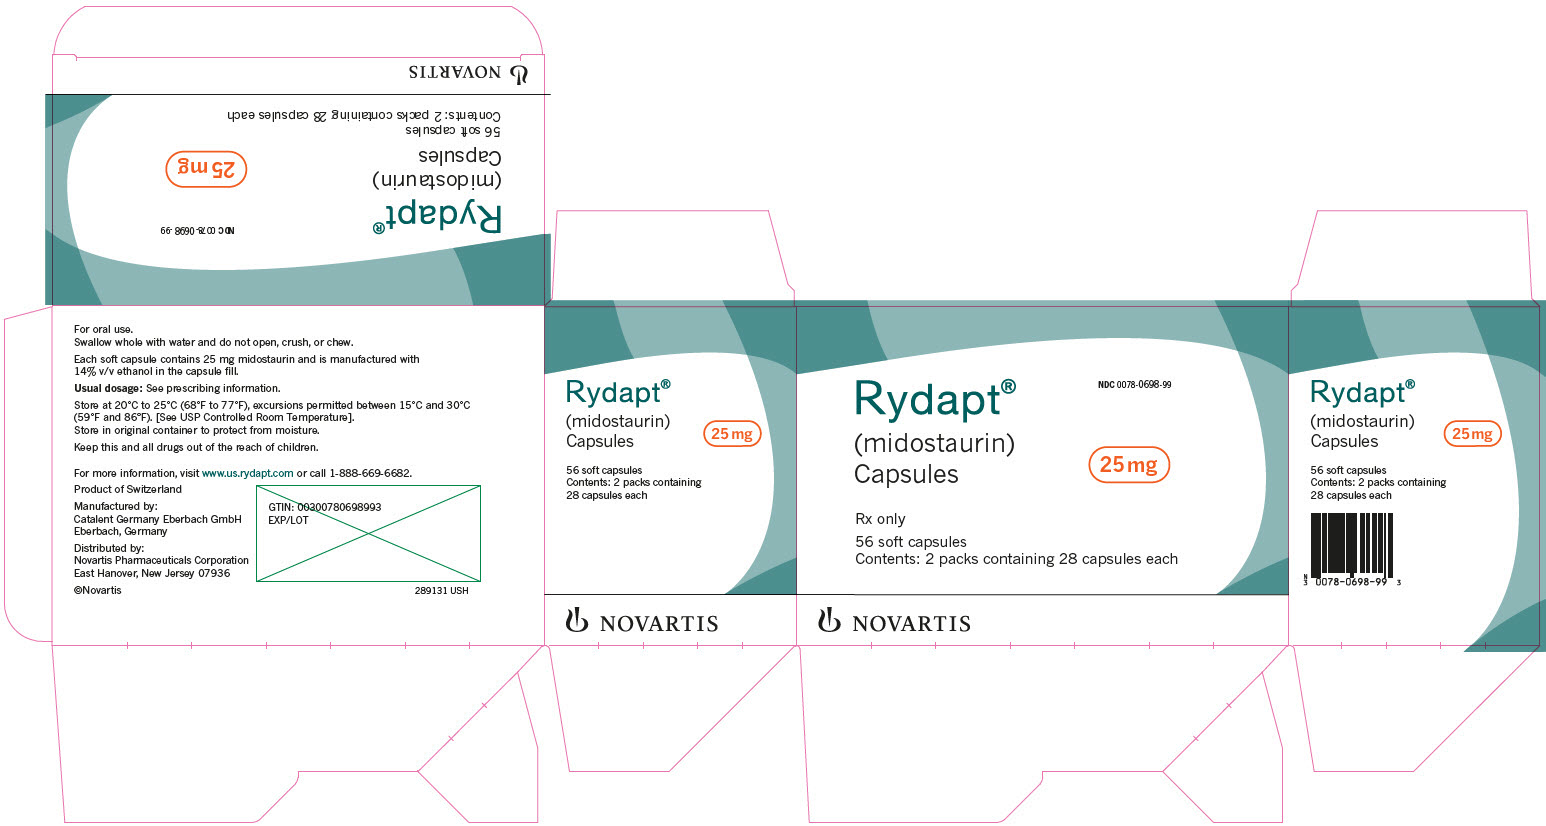 PRINCIPAL DISPLAY PANEL
								Rydapt®
								NDC 0078-0698-99
								(midostaurin) Capsules
								25 mg
								Rx only
								56 soft capsules
								Contents: 2 packs containing 28 capsules each
								NOVARTIS
							